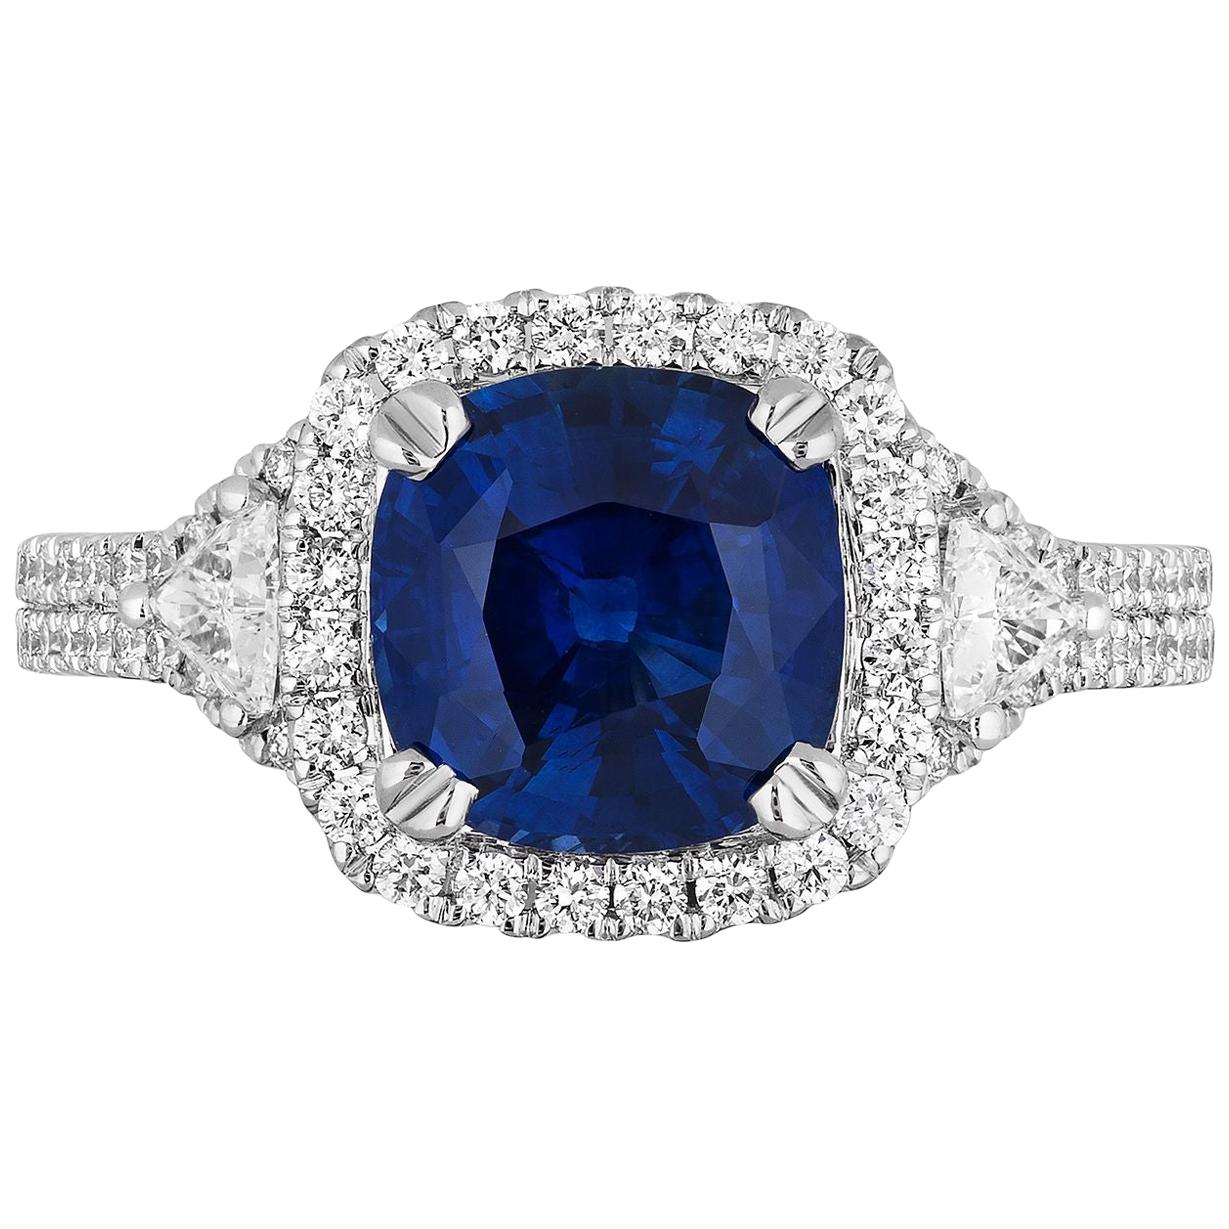 2.68 Carat Sapphire Diamond Cocktail Ring For Sale